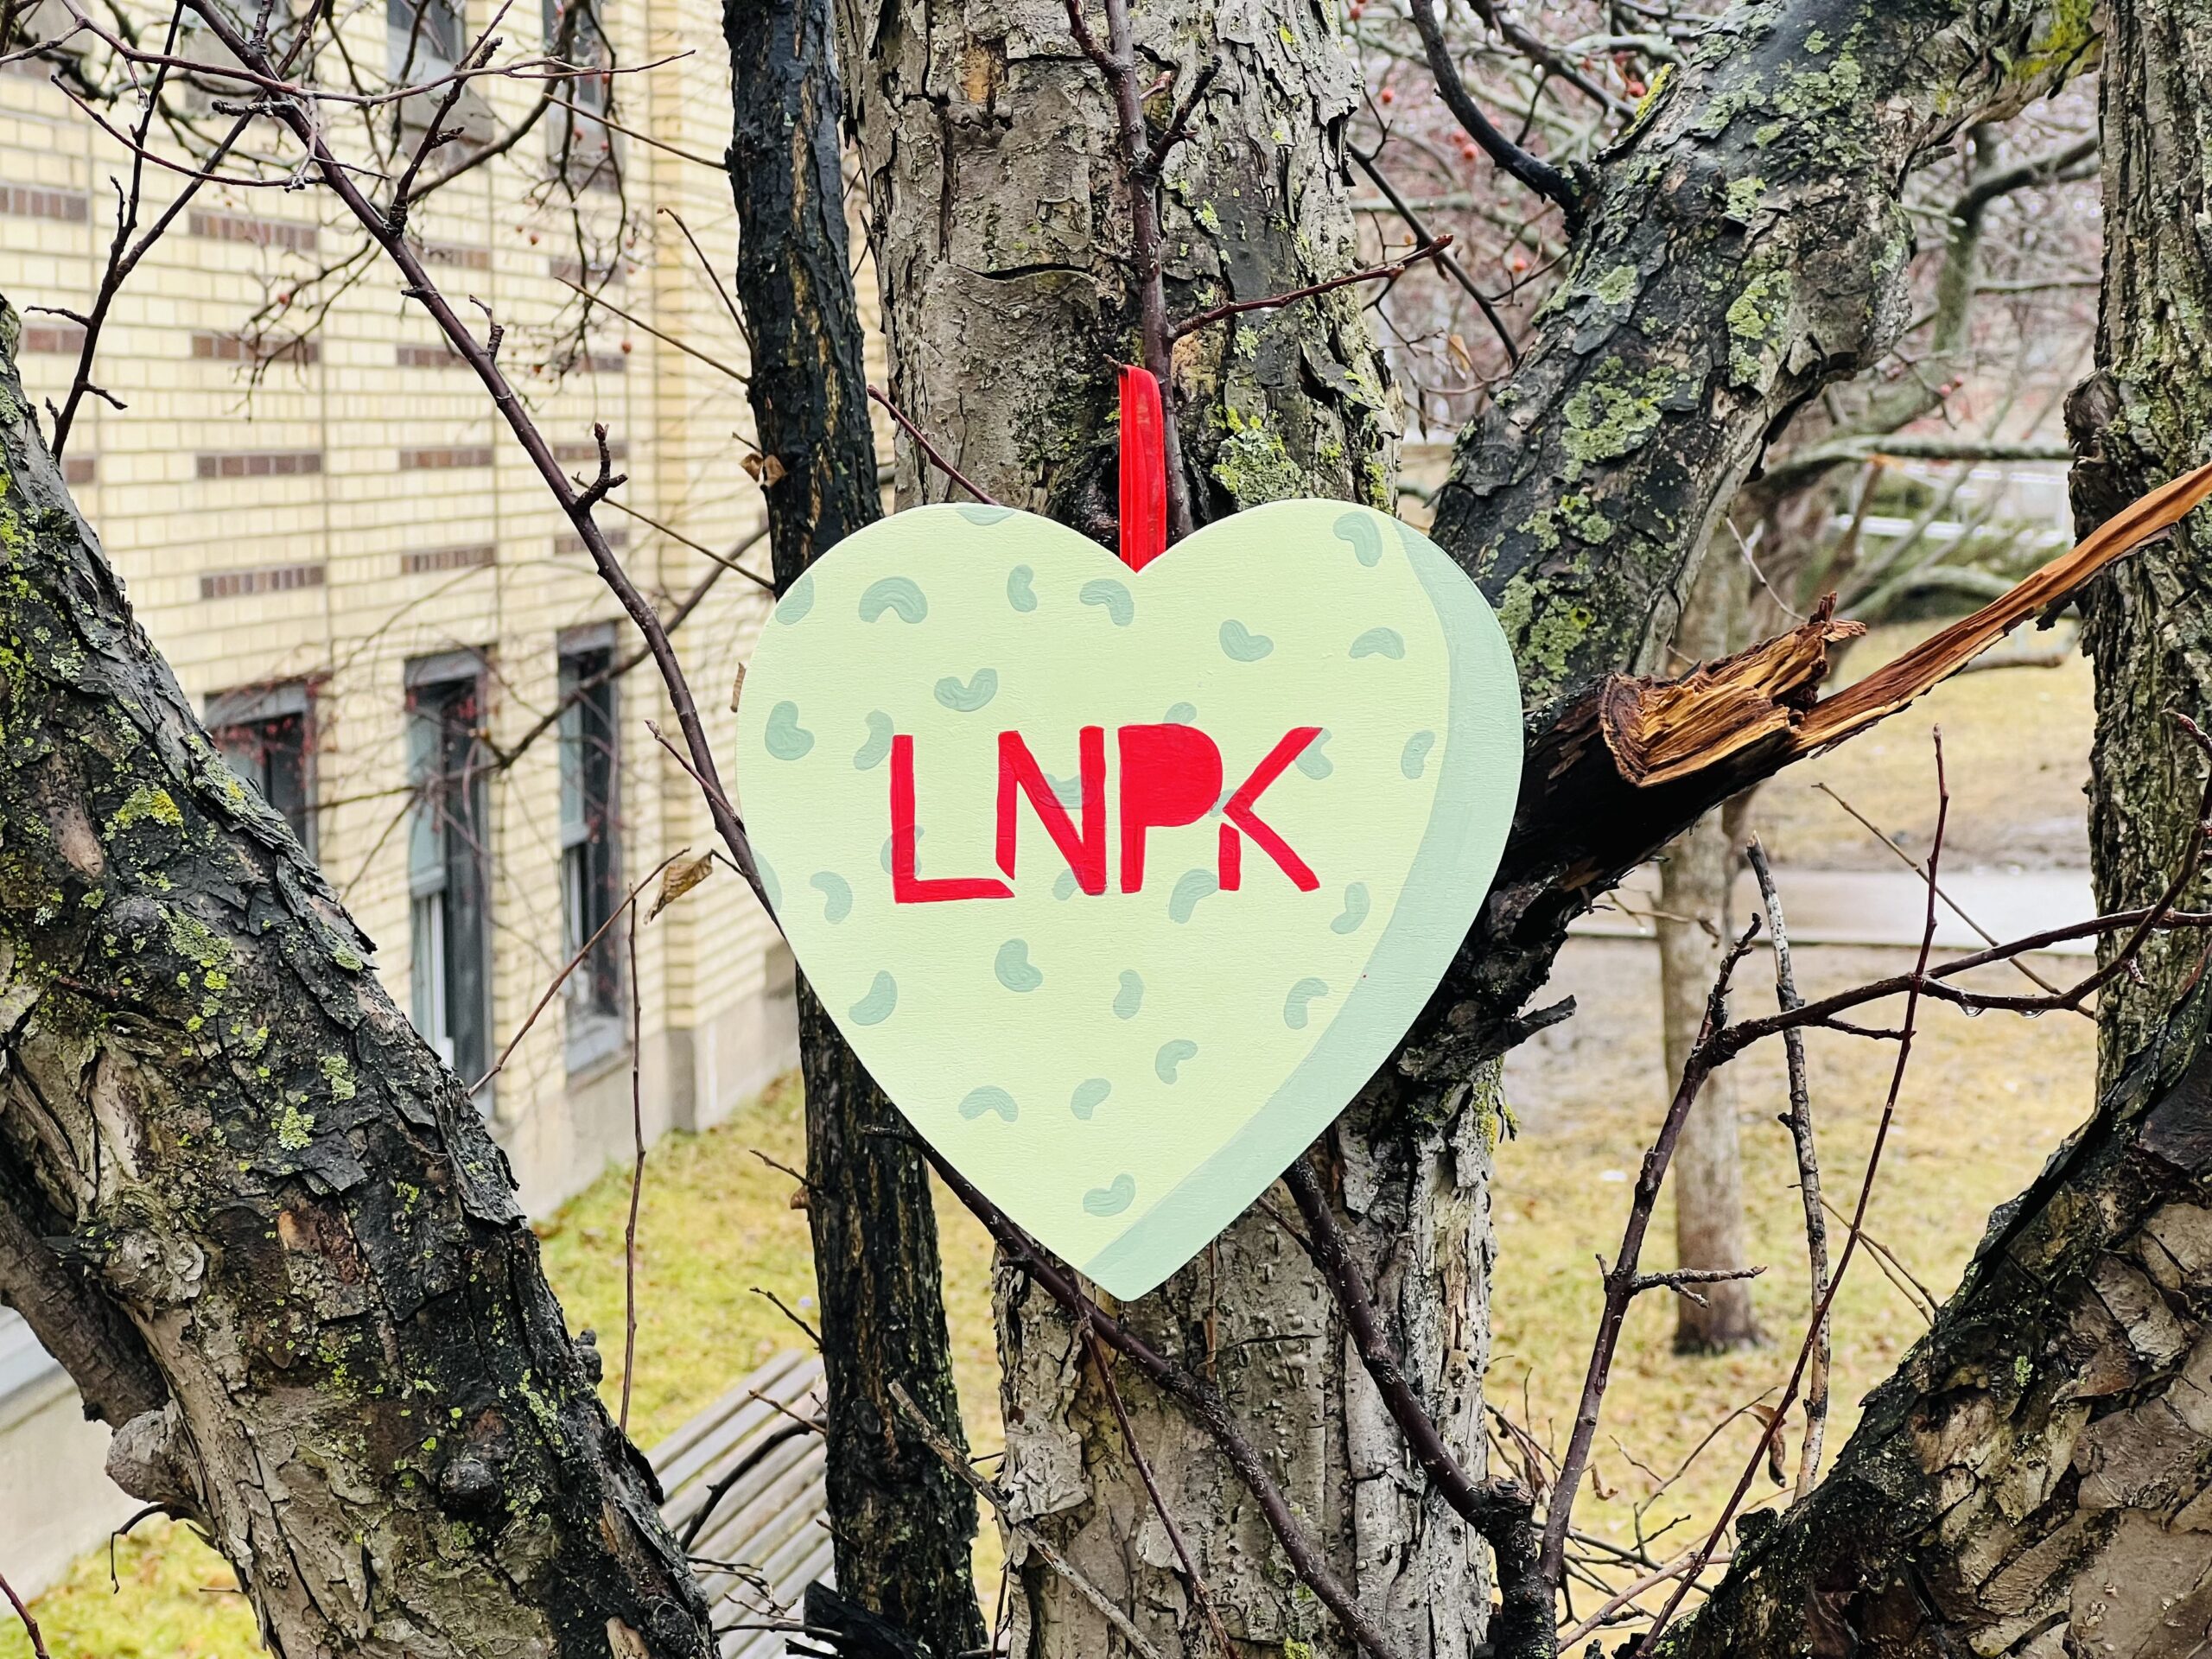 Light green heart with pink texture and "LNPK" in red hangs on a tree outside a brick building.